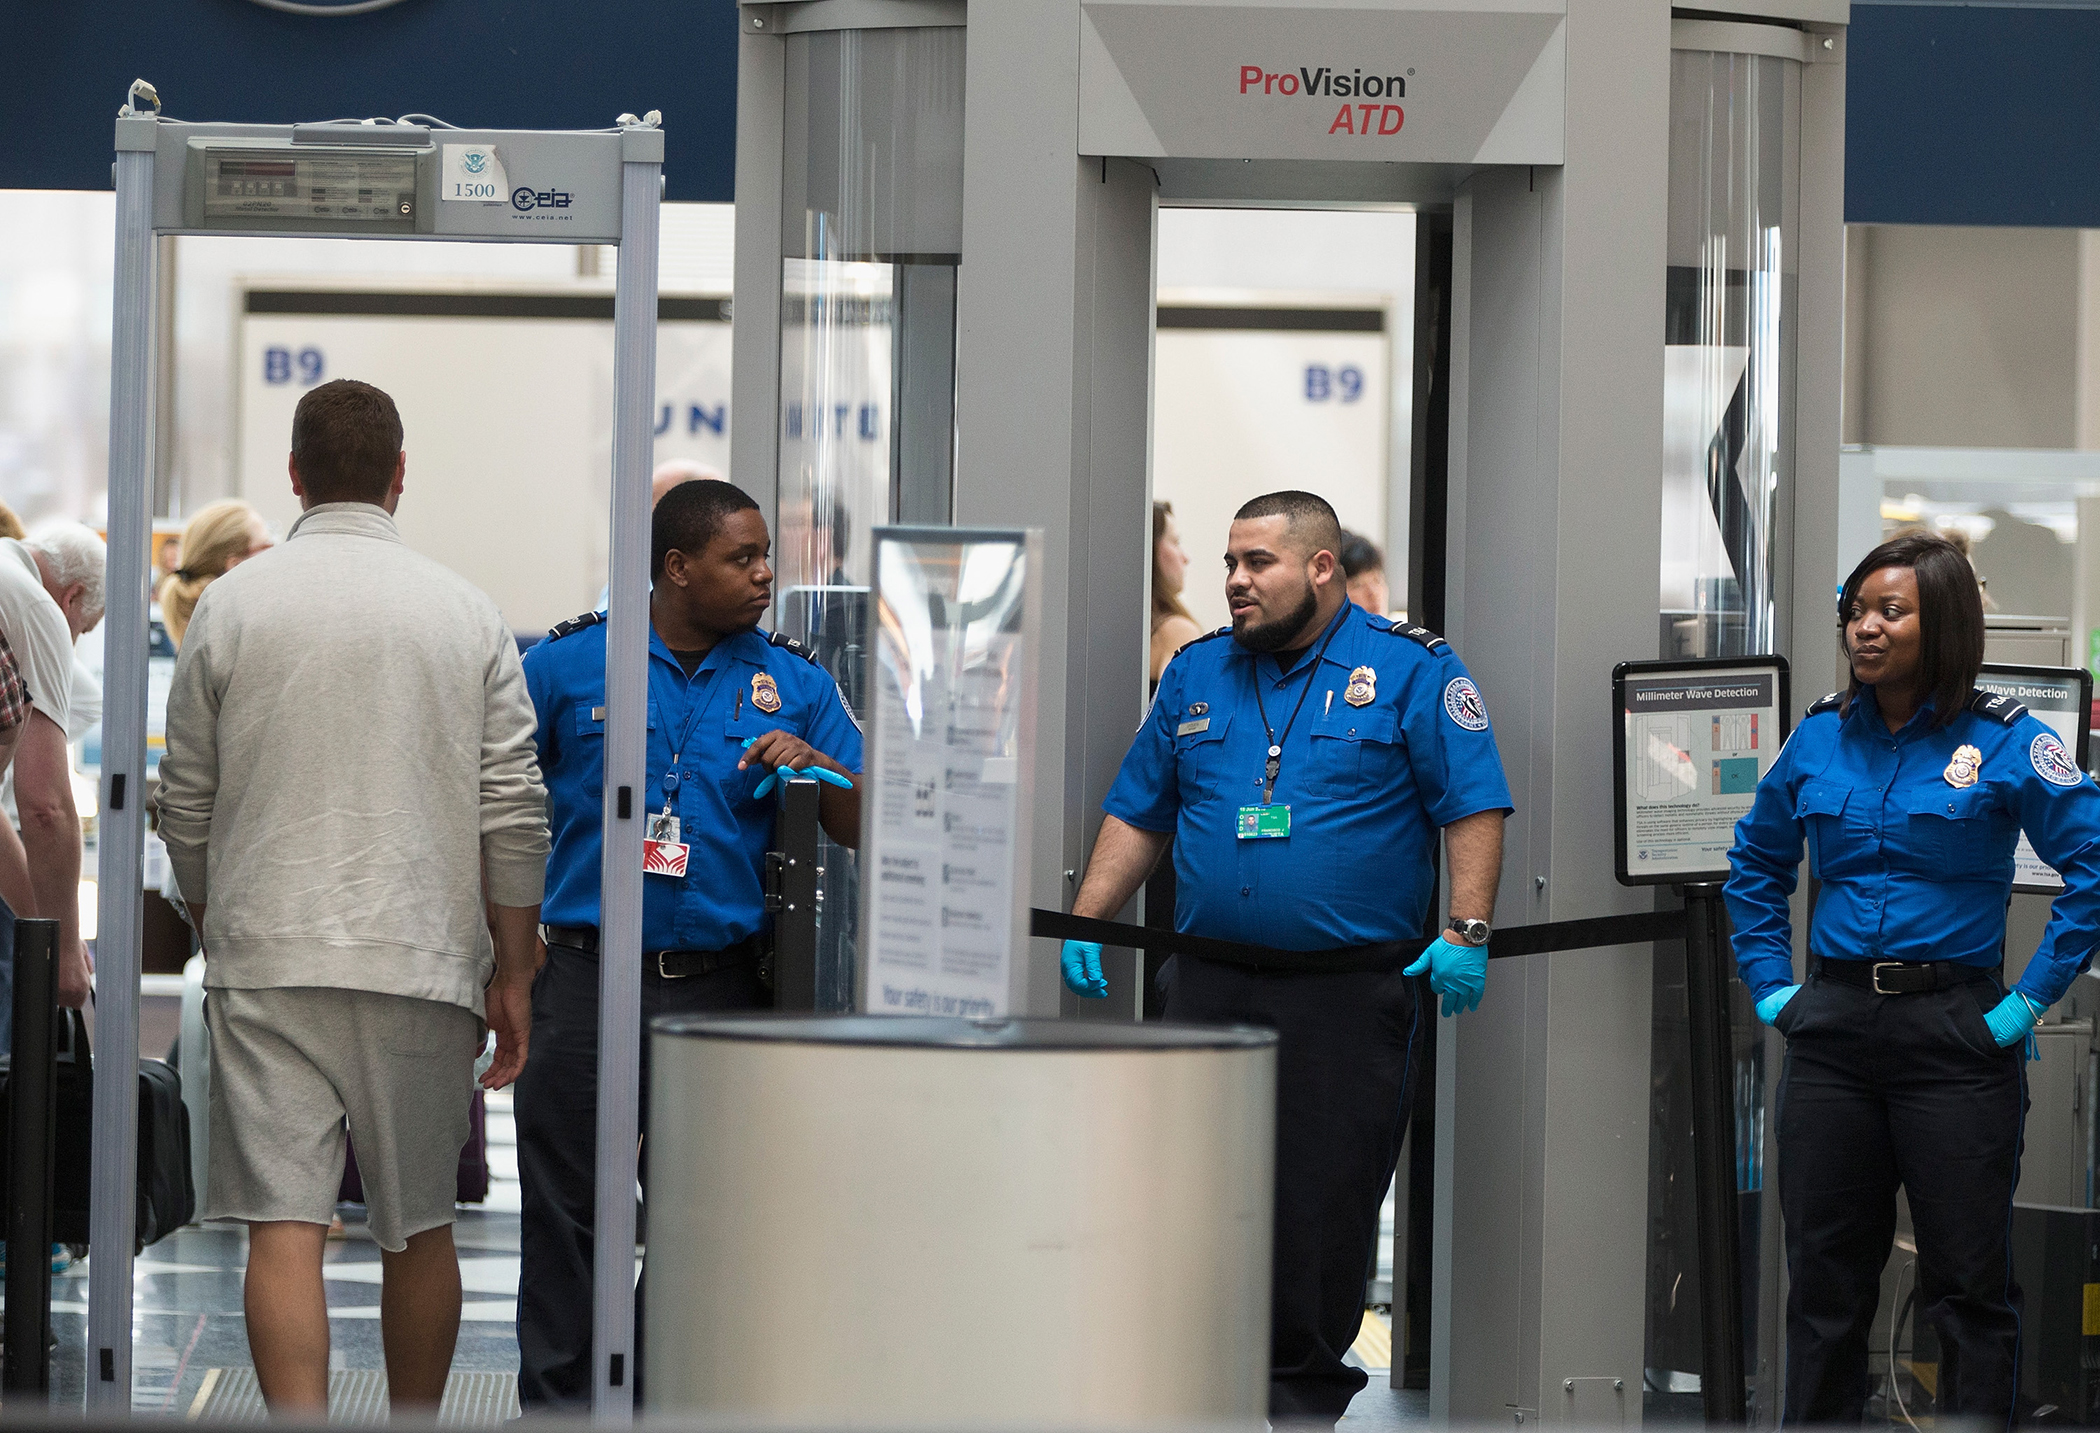 Travelers are screened by Transportation Security Administration workers at a security check point at O'Hare Airport on June 2, 2015 in Chicago, Illinois.